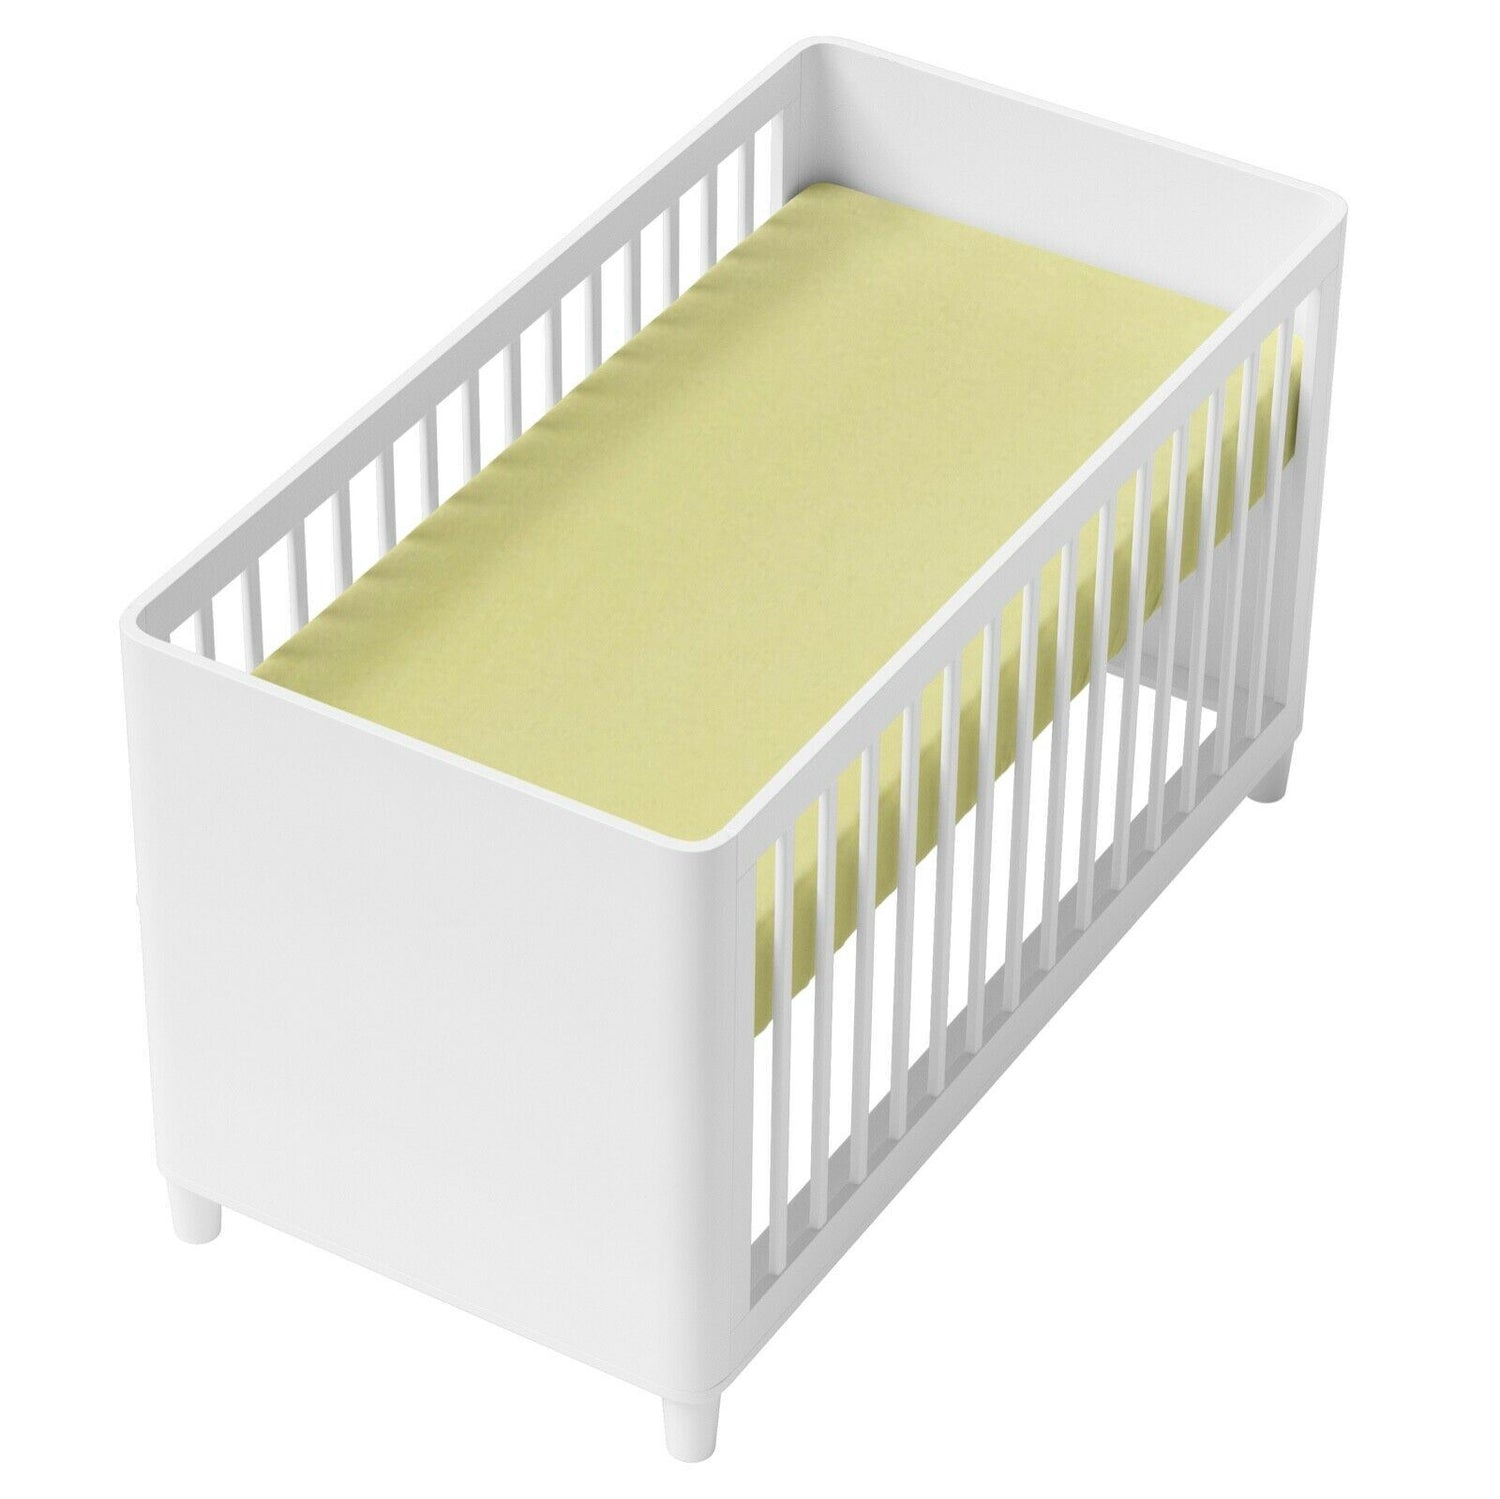 Super Soft Fitted Sheet Jersey Stretchy Cotton Fit Cot Bed 140/70cm Yellow